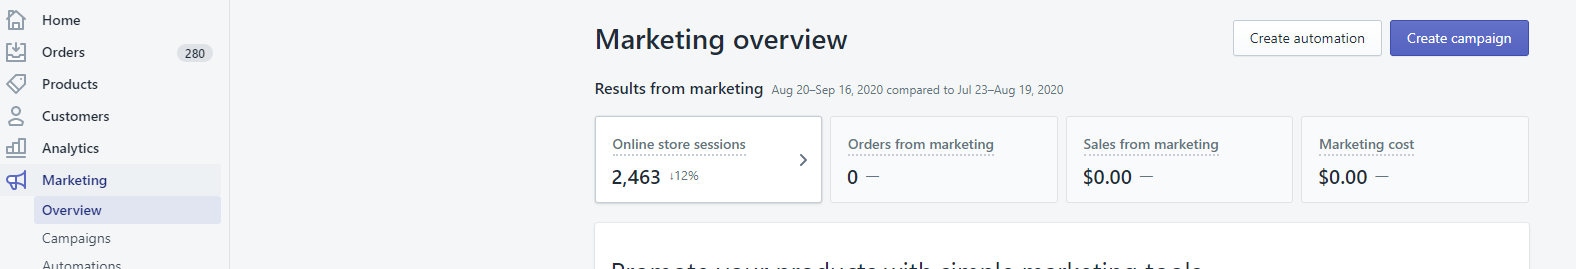 Marketing section of Shopify